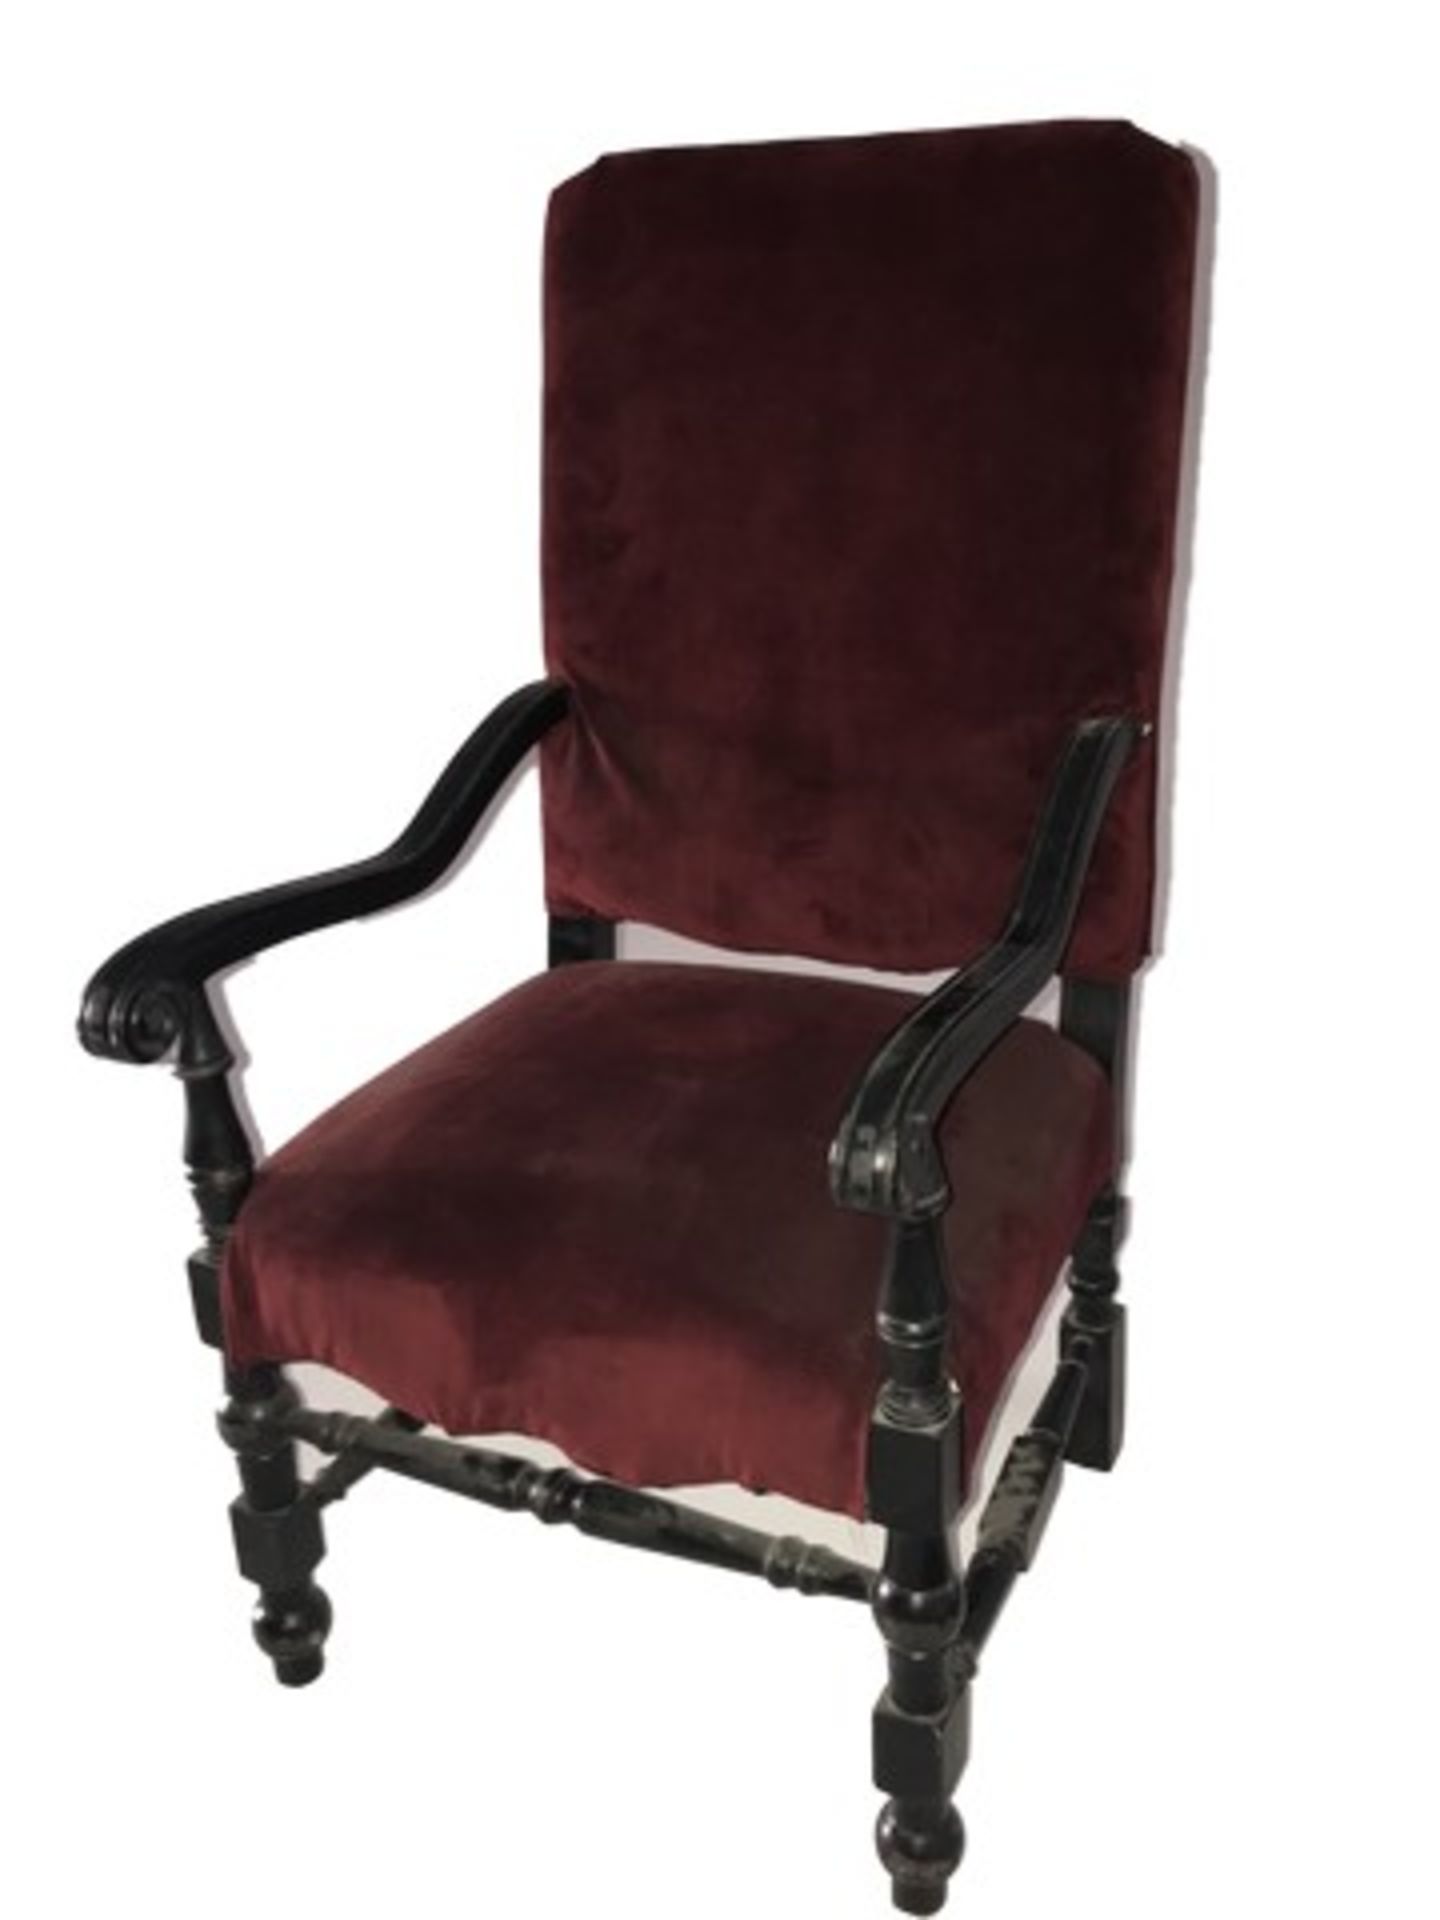 Burgundy Dining Chair - Image 2 of 2